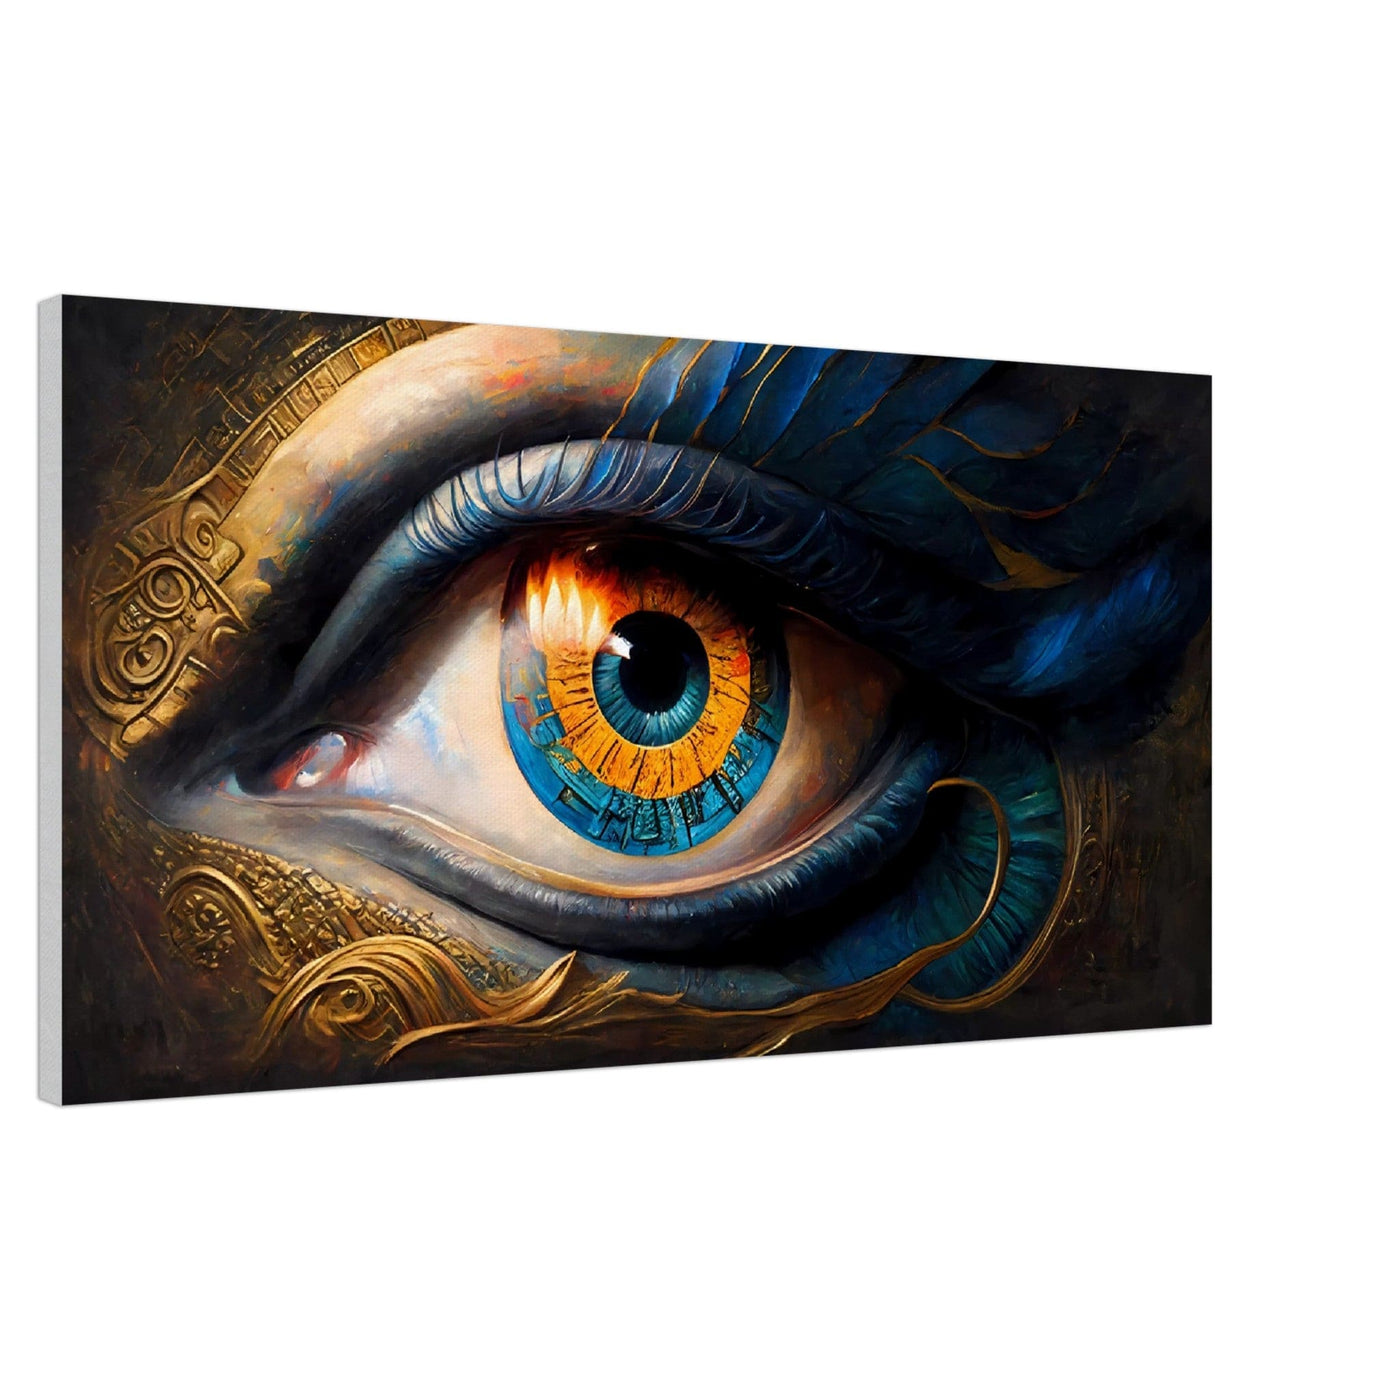 Eye of Horus: The All-Seeing Eye - Oil Painting Printed Canvas. 50X100.